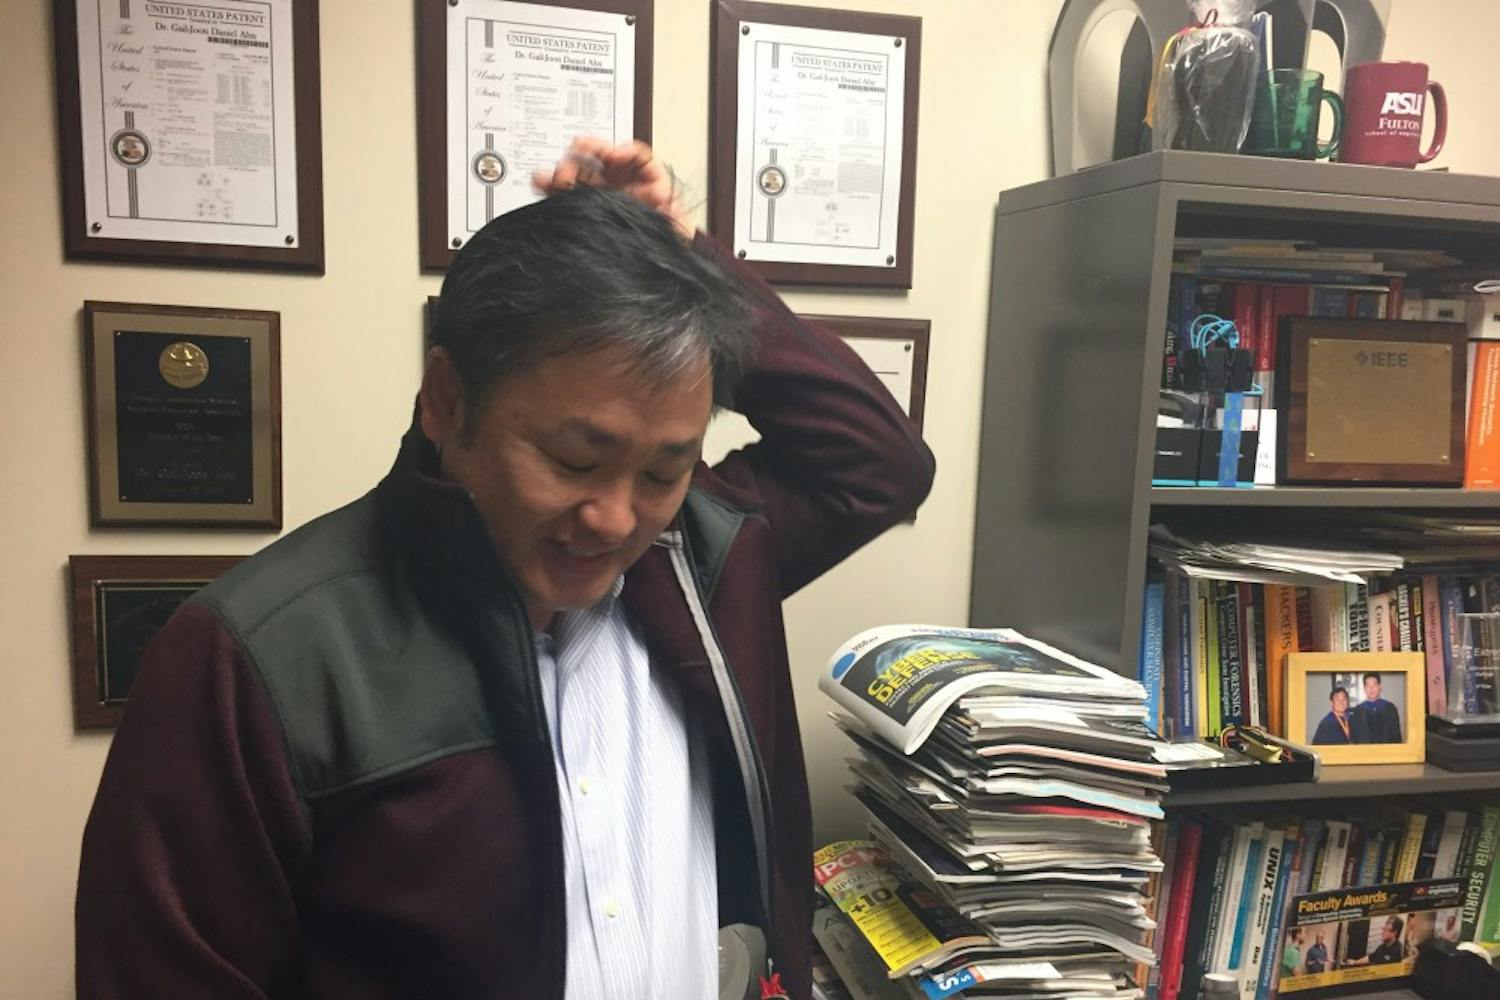 Dr. Gail-Joon Ahn,&nbsp;director of ASU’s Laboratory of Security Engineering for Future Computing, in his office in Tempe, AZ&nbsp;on Jan 18, 2017.